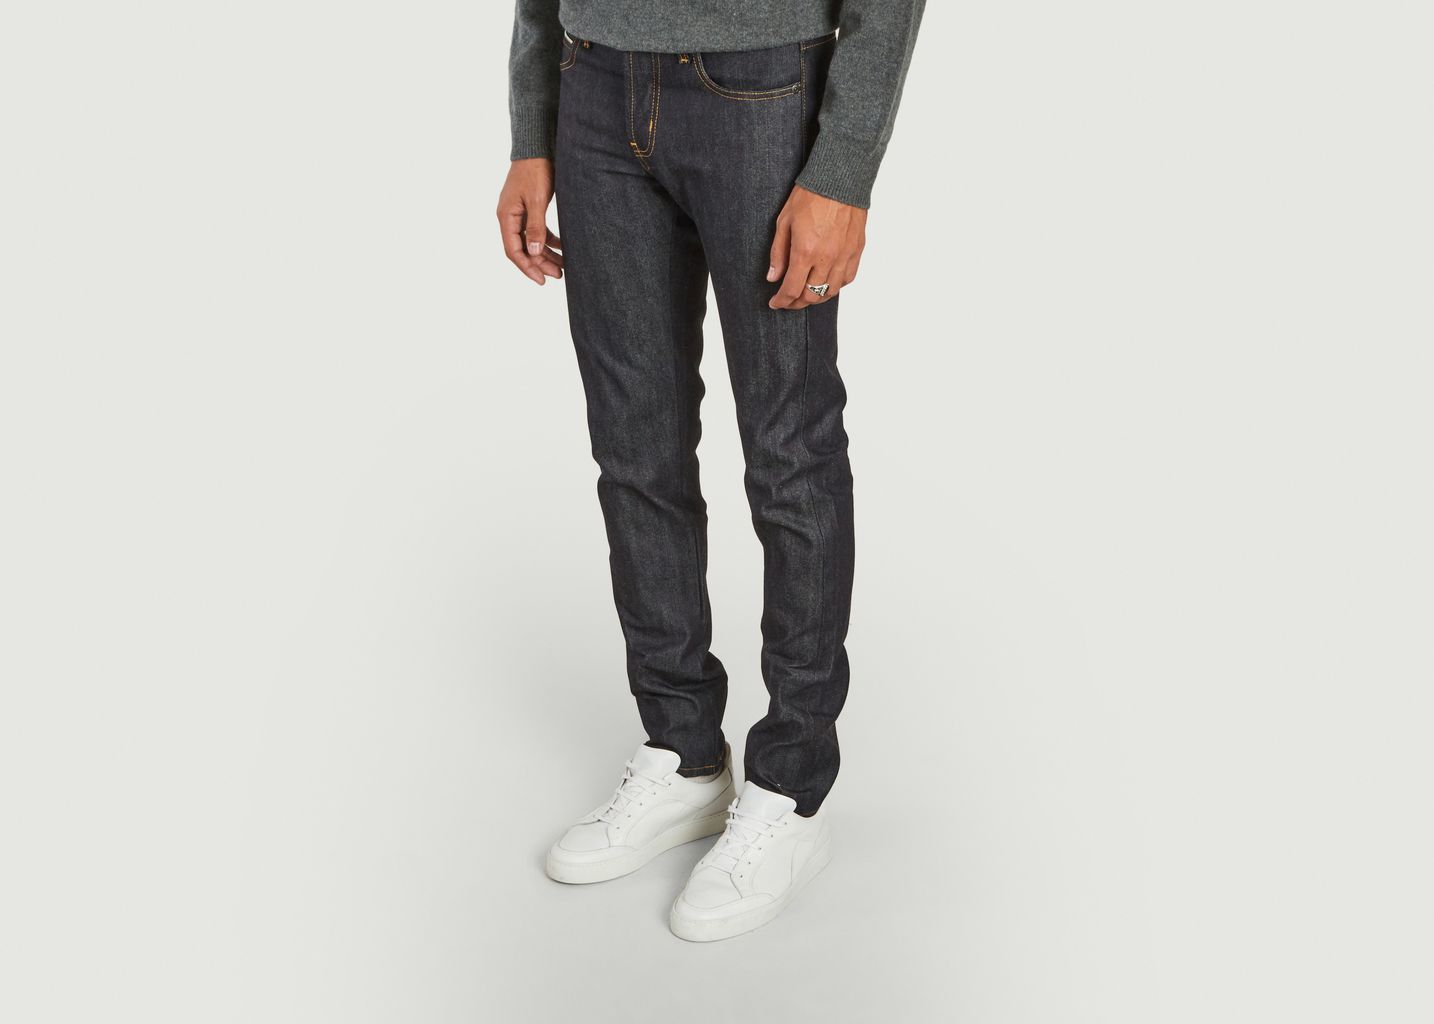 Super Guy Guardian Selvedge Jeans - Naked and Famous